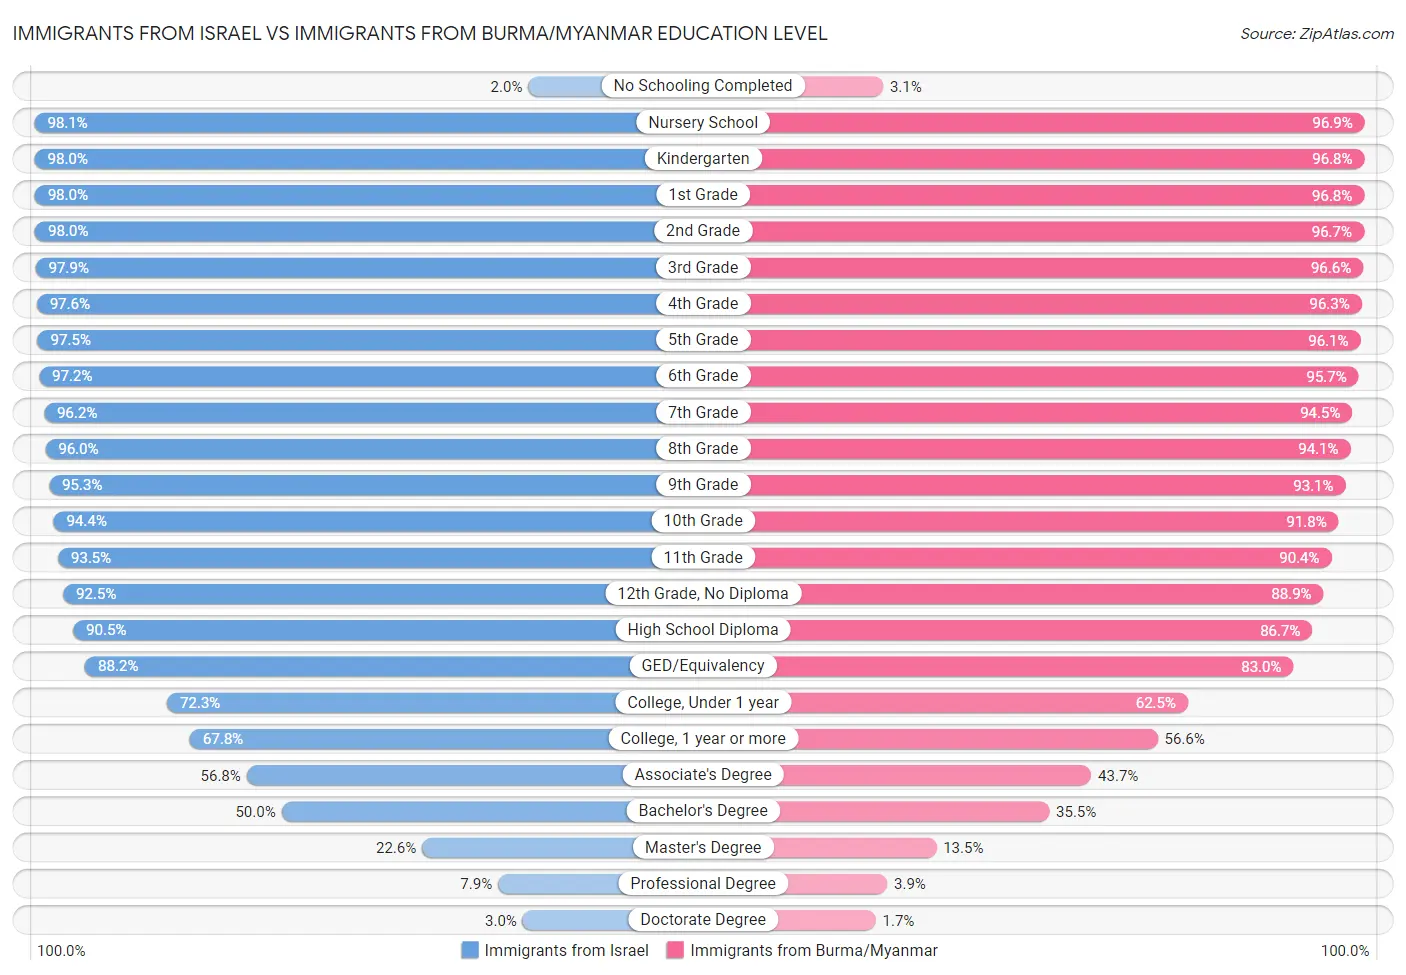 Immigrants from Israel vs Immigrants from Burma/Myanmar Education Level